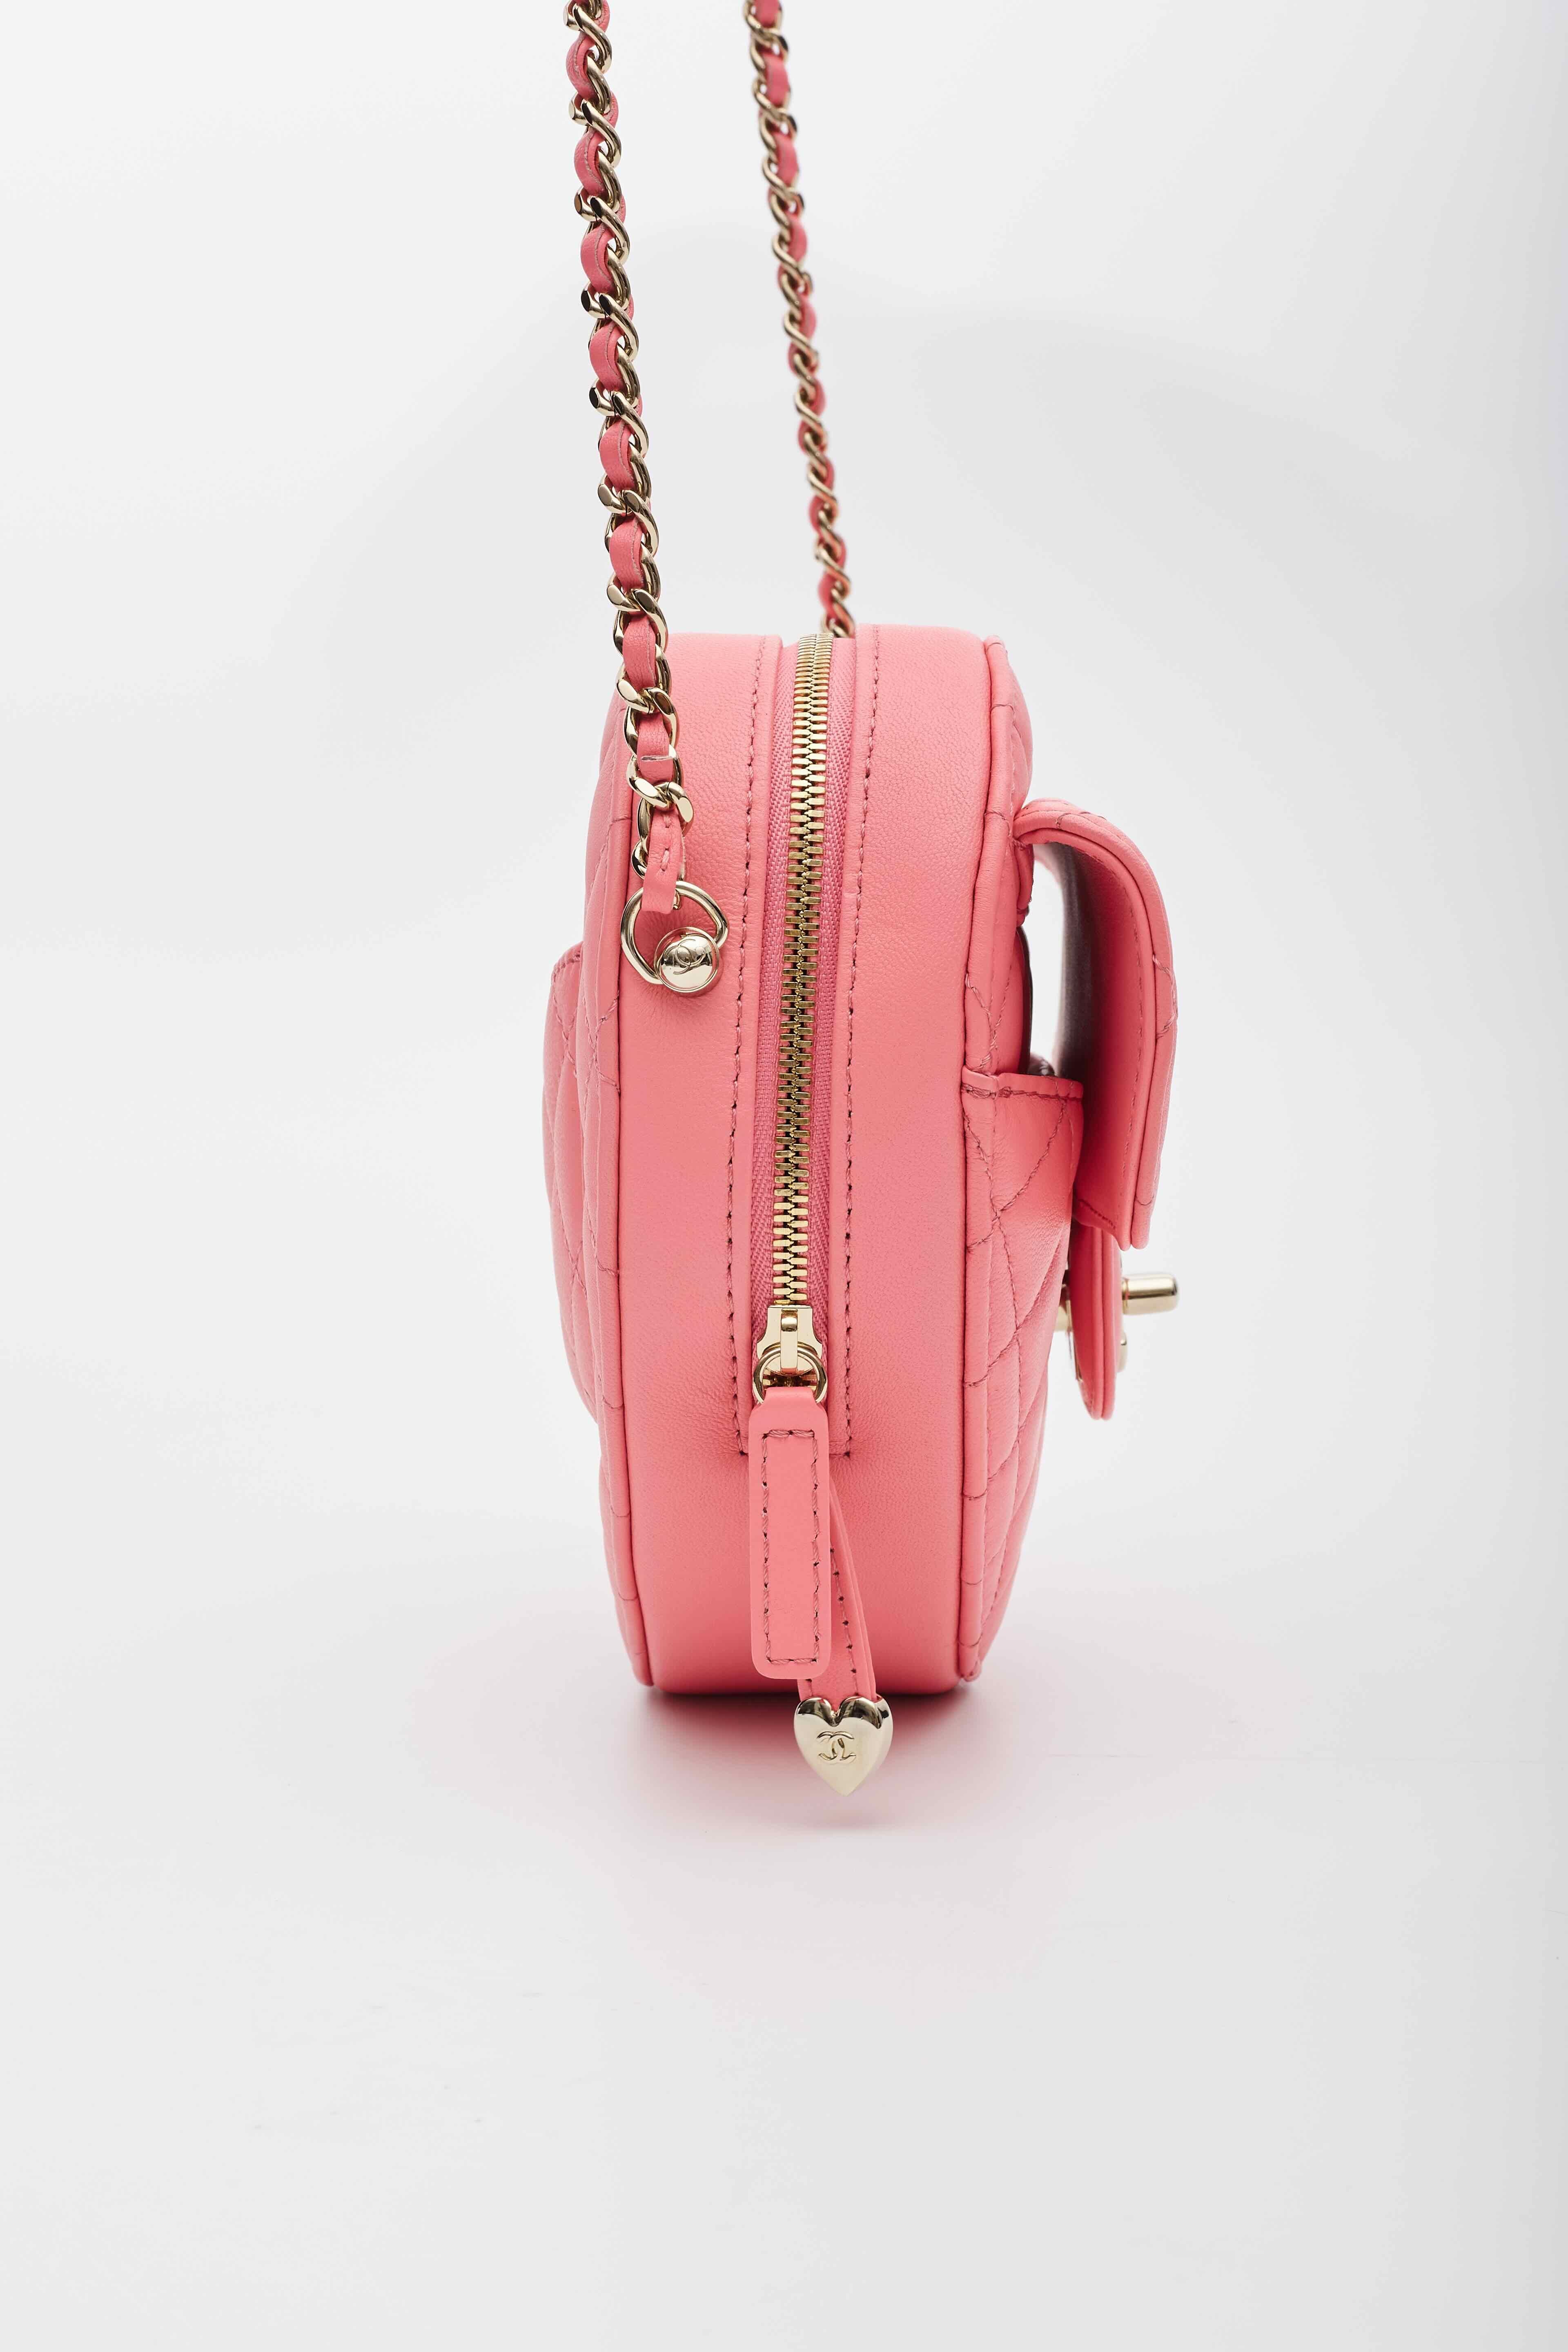 Chanel Lambskin Quilted CC In Love Heart Shoulder Bag Pink 4